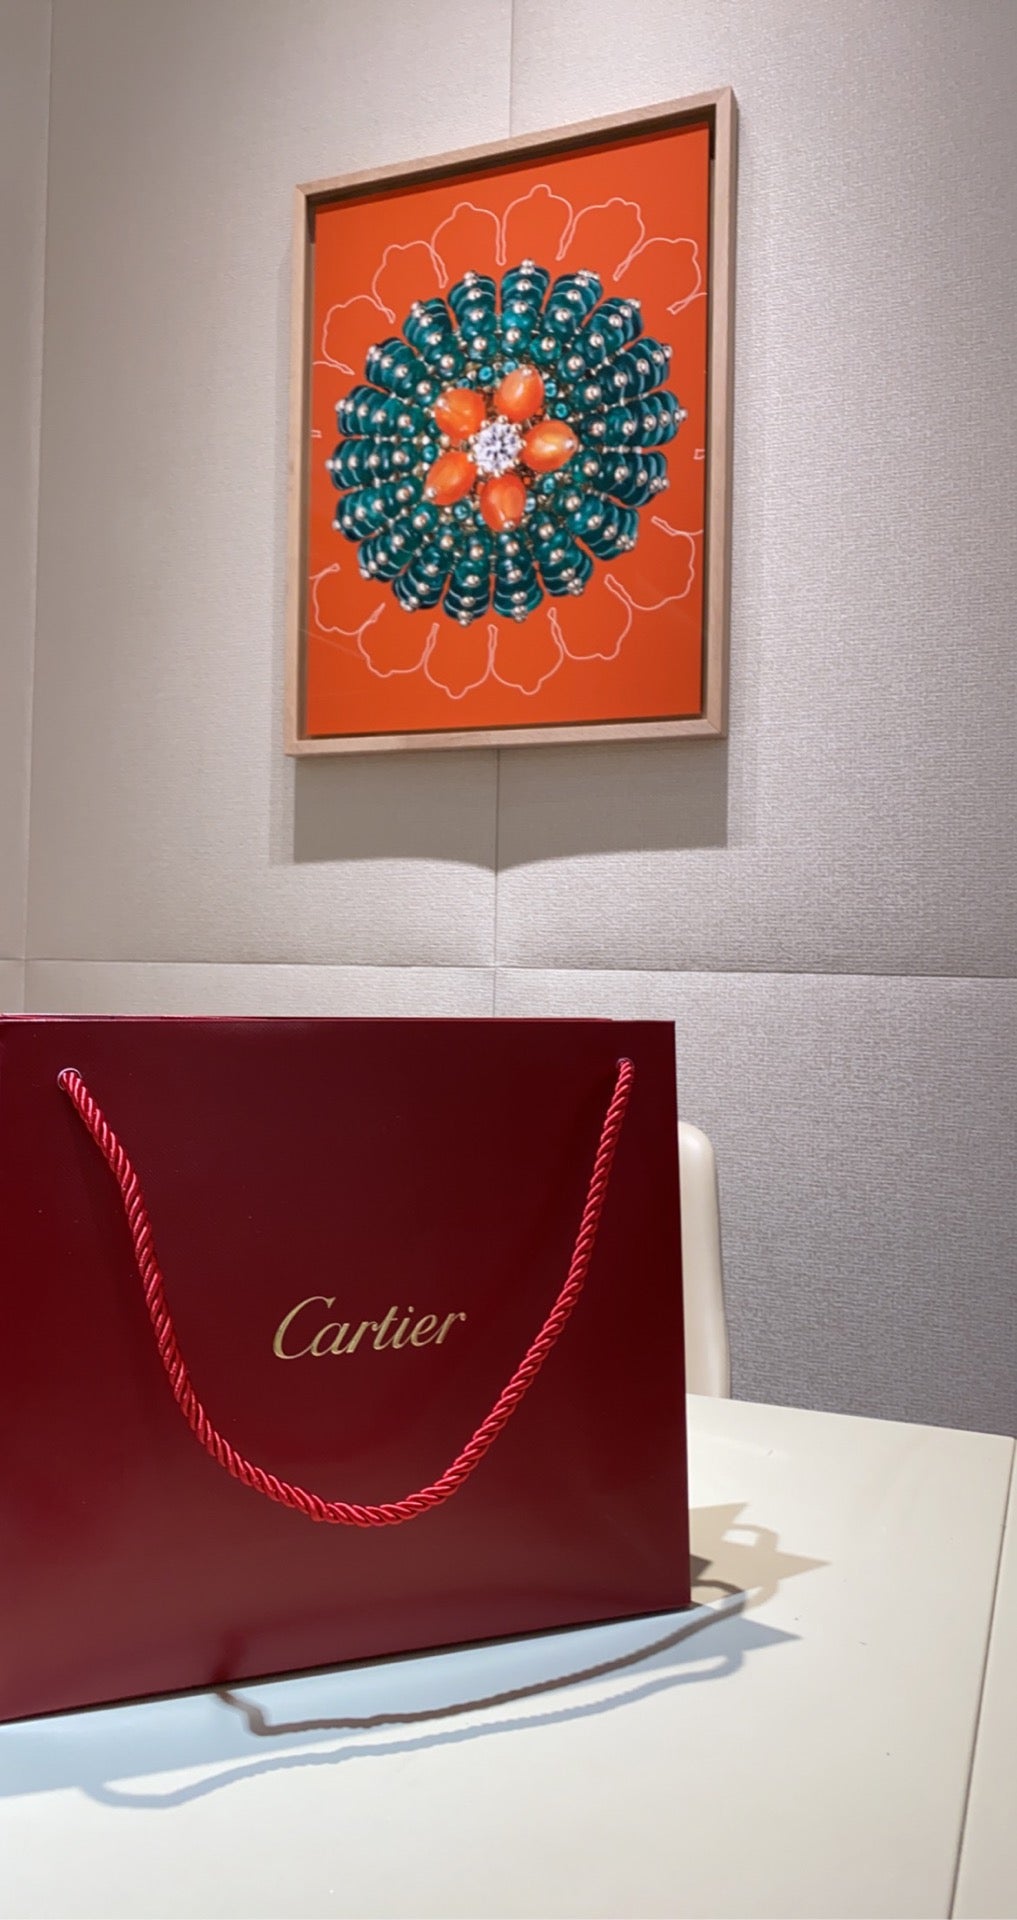 Cartier Scottsdale Fashion Square: fine jewelry, watches, accessories at  7014 E Camelback Road - Cartier